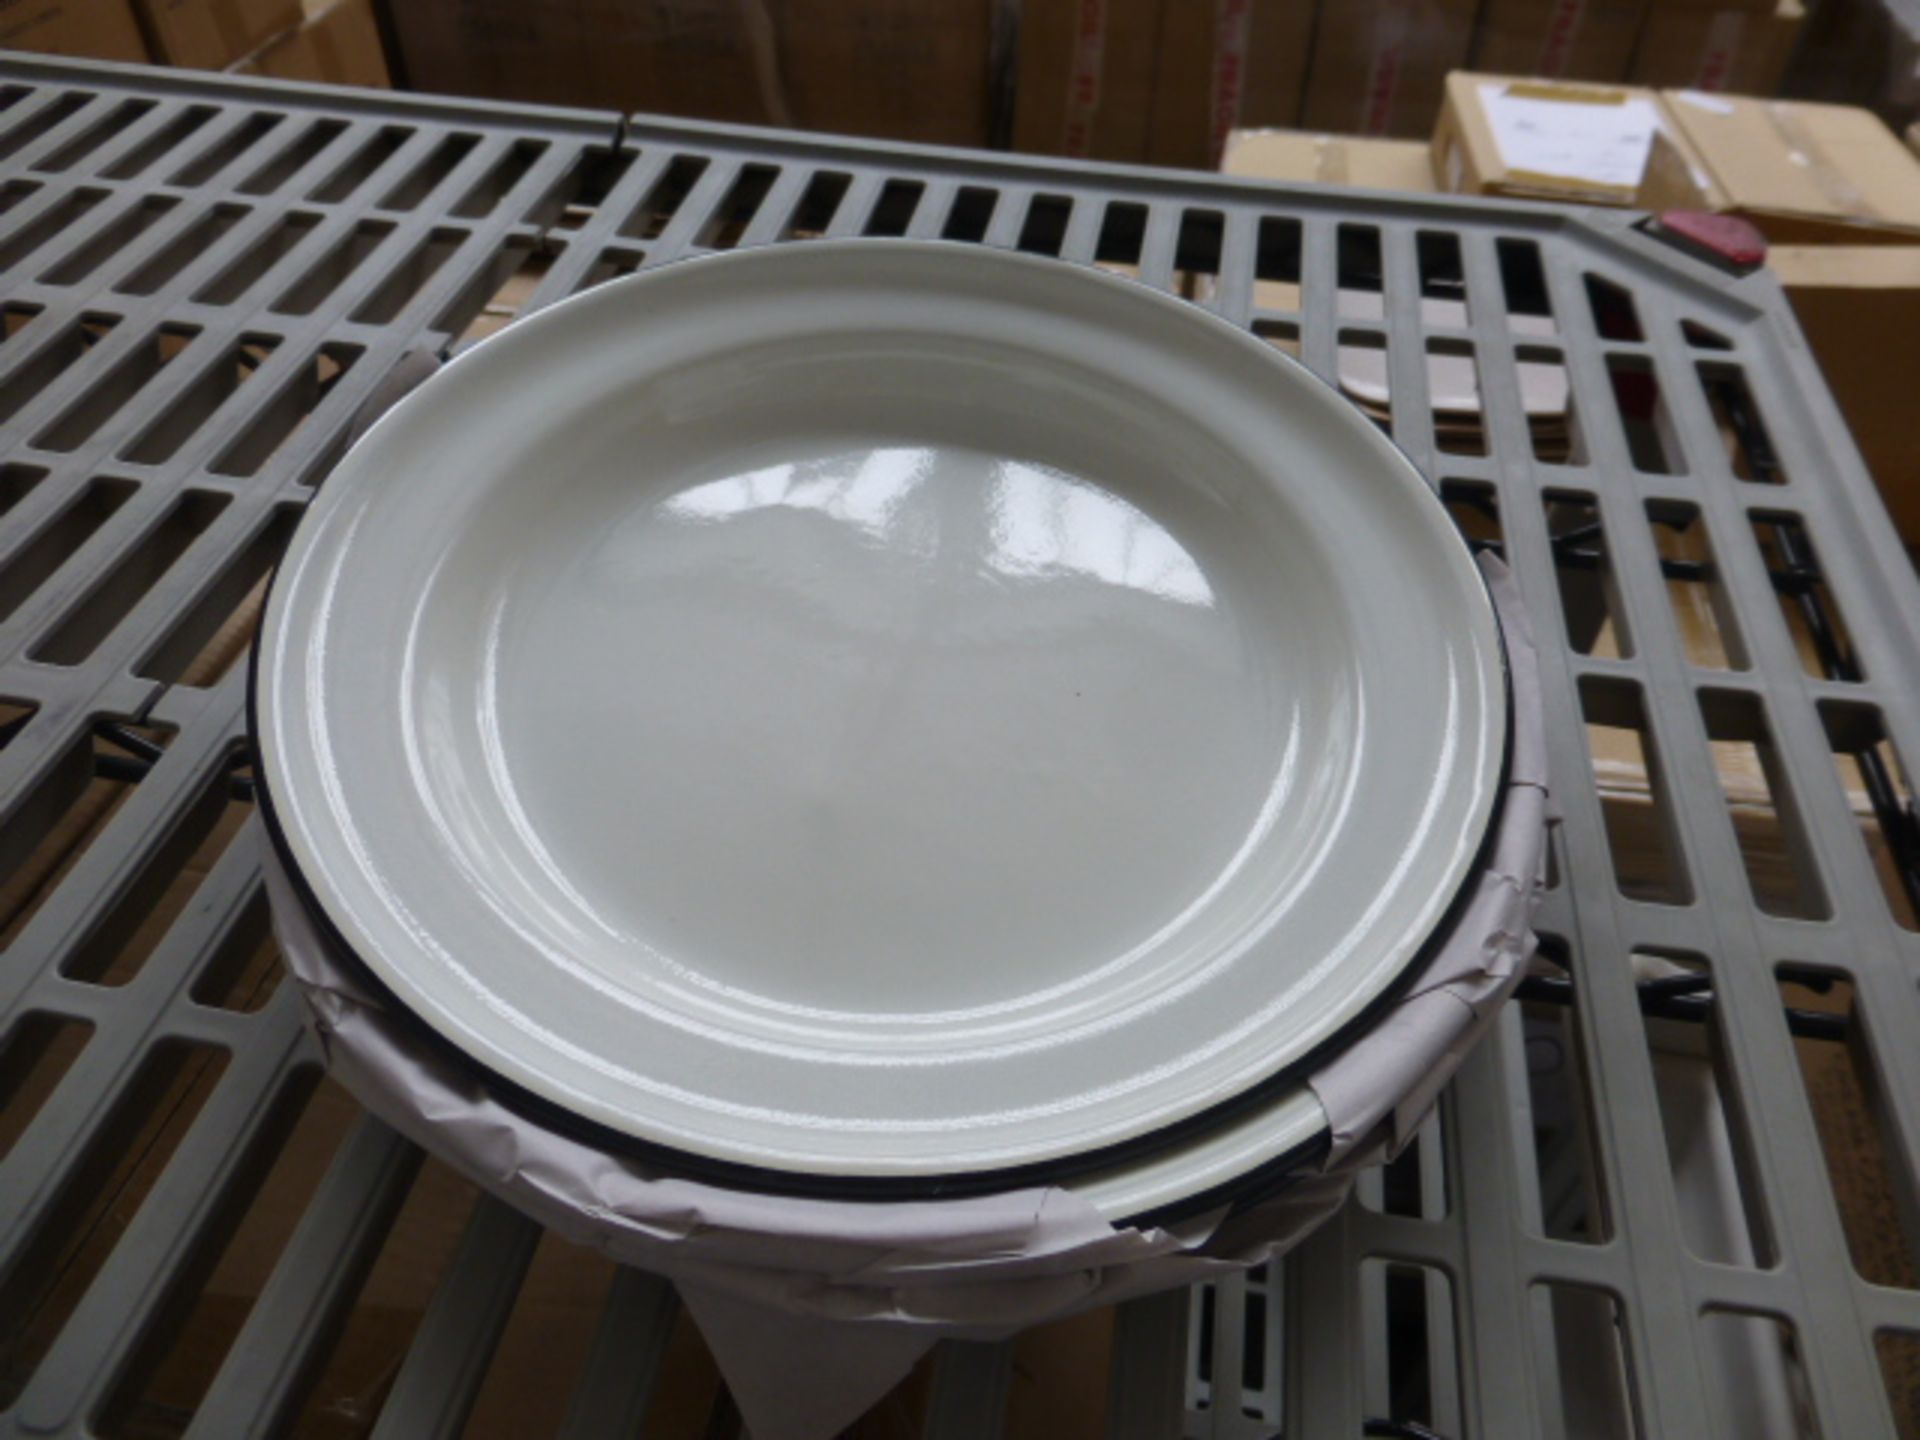 1 box of 27cm enamel round plates with black rim (48 in total)